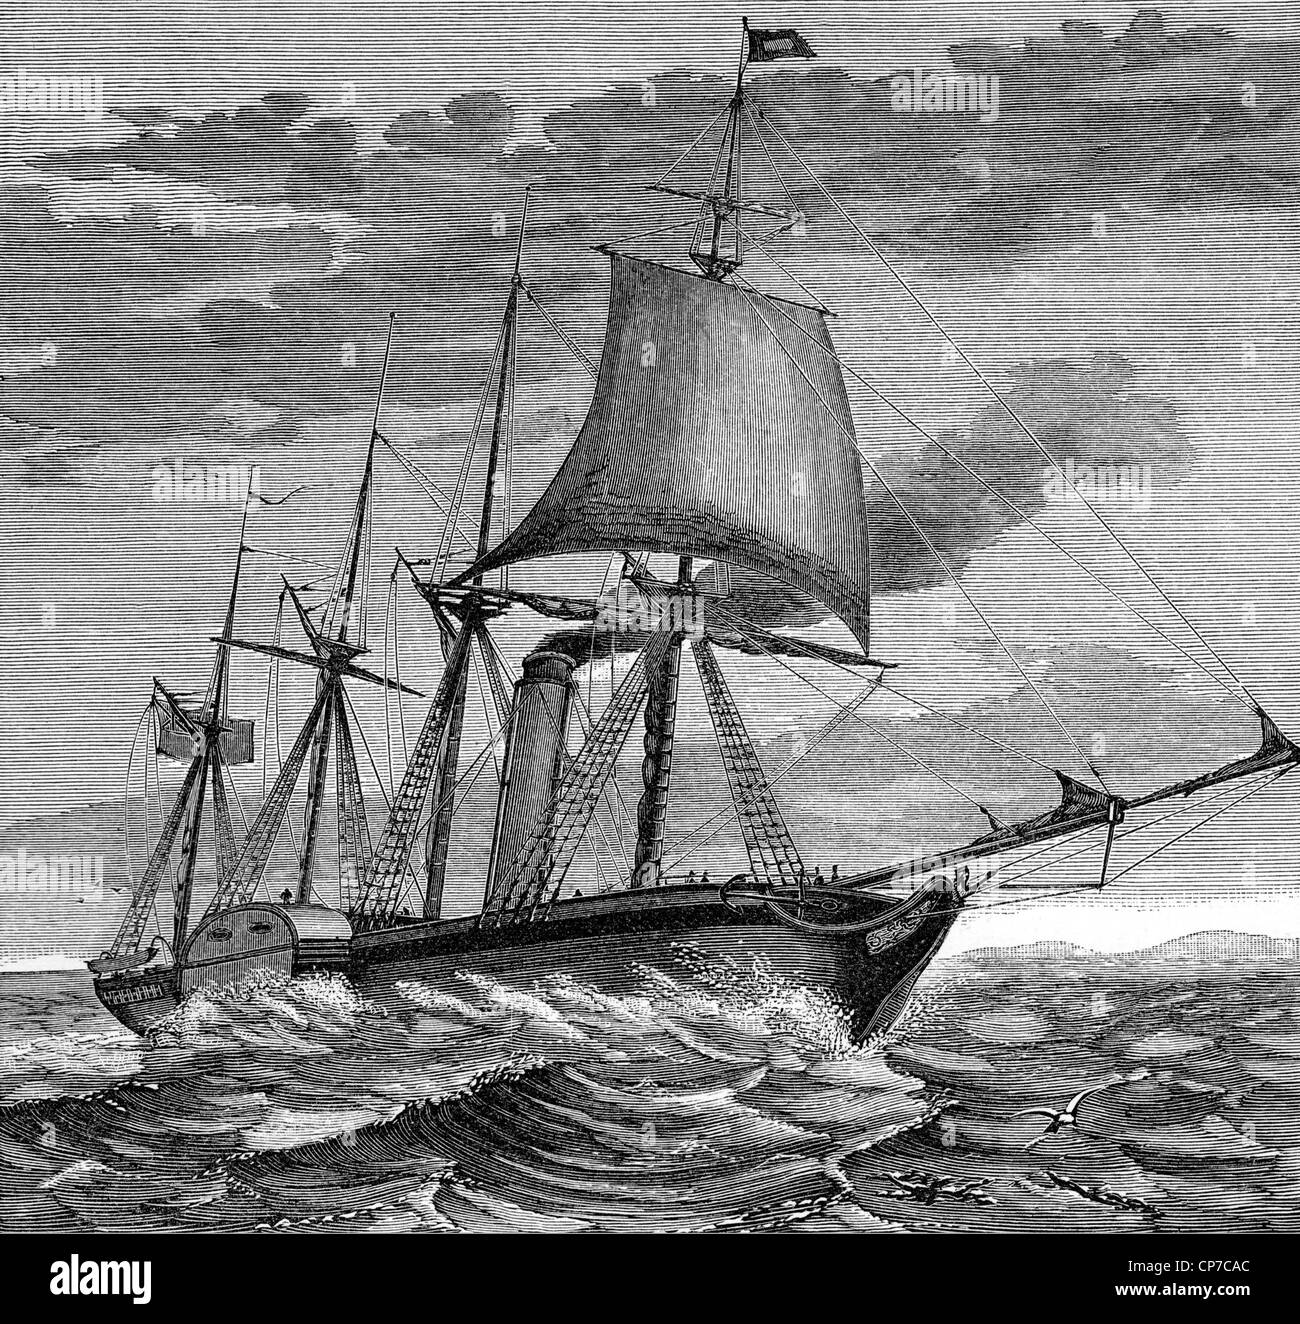 Engraving of SS Great Western steamship sailing on sea. Stock Photo